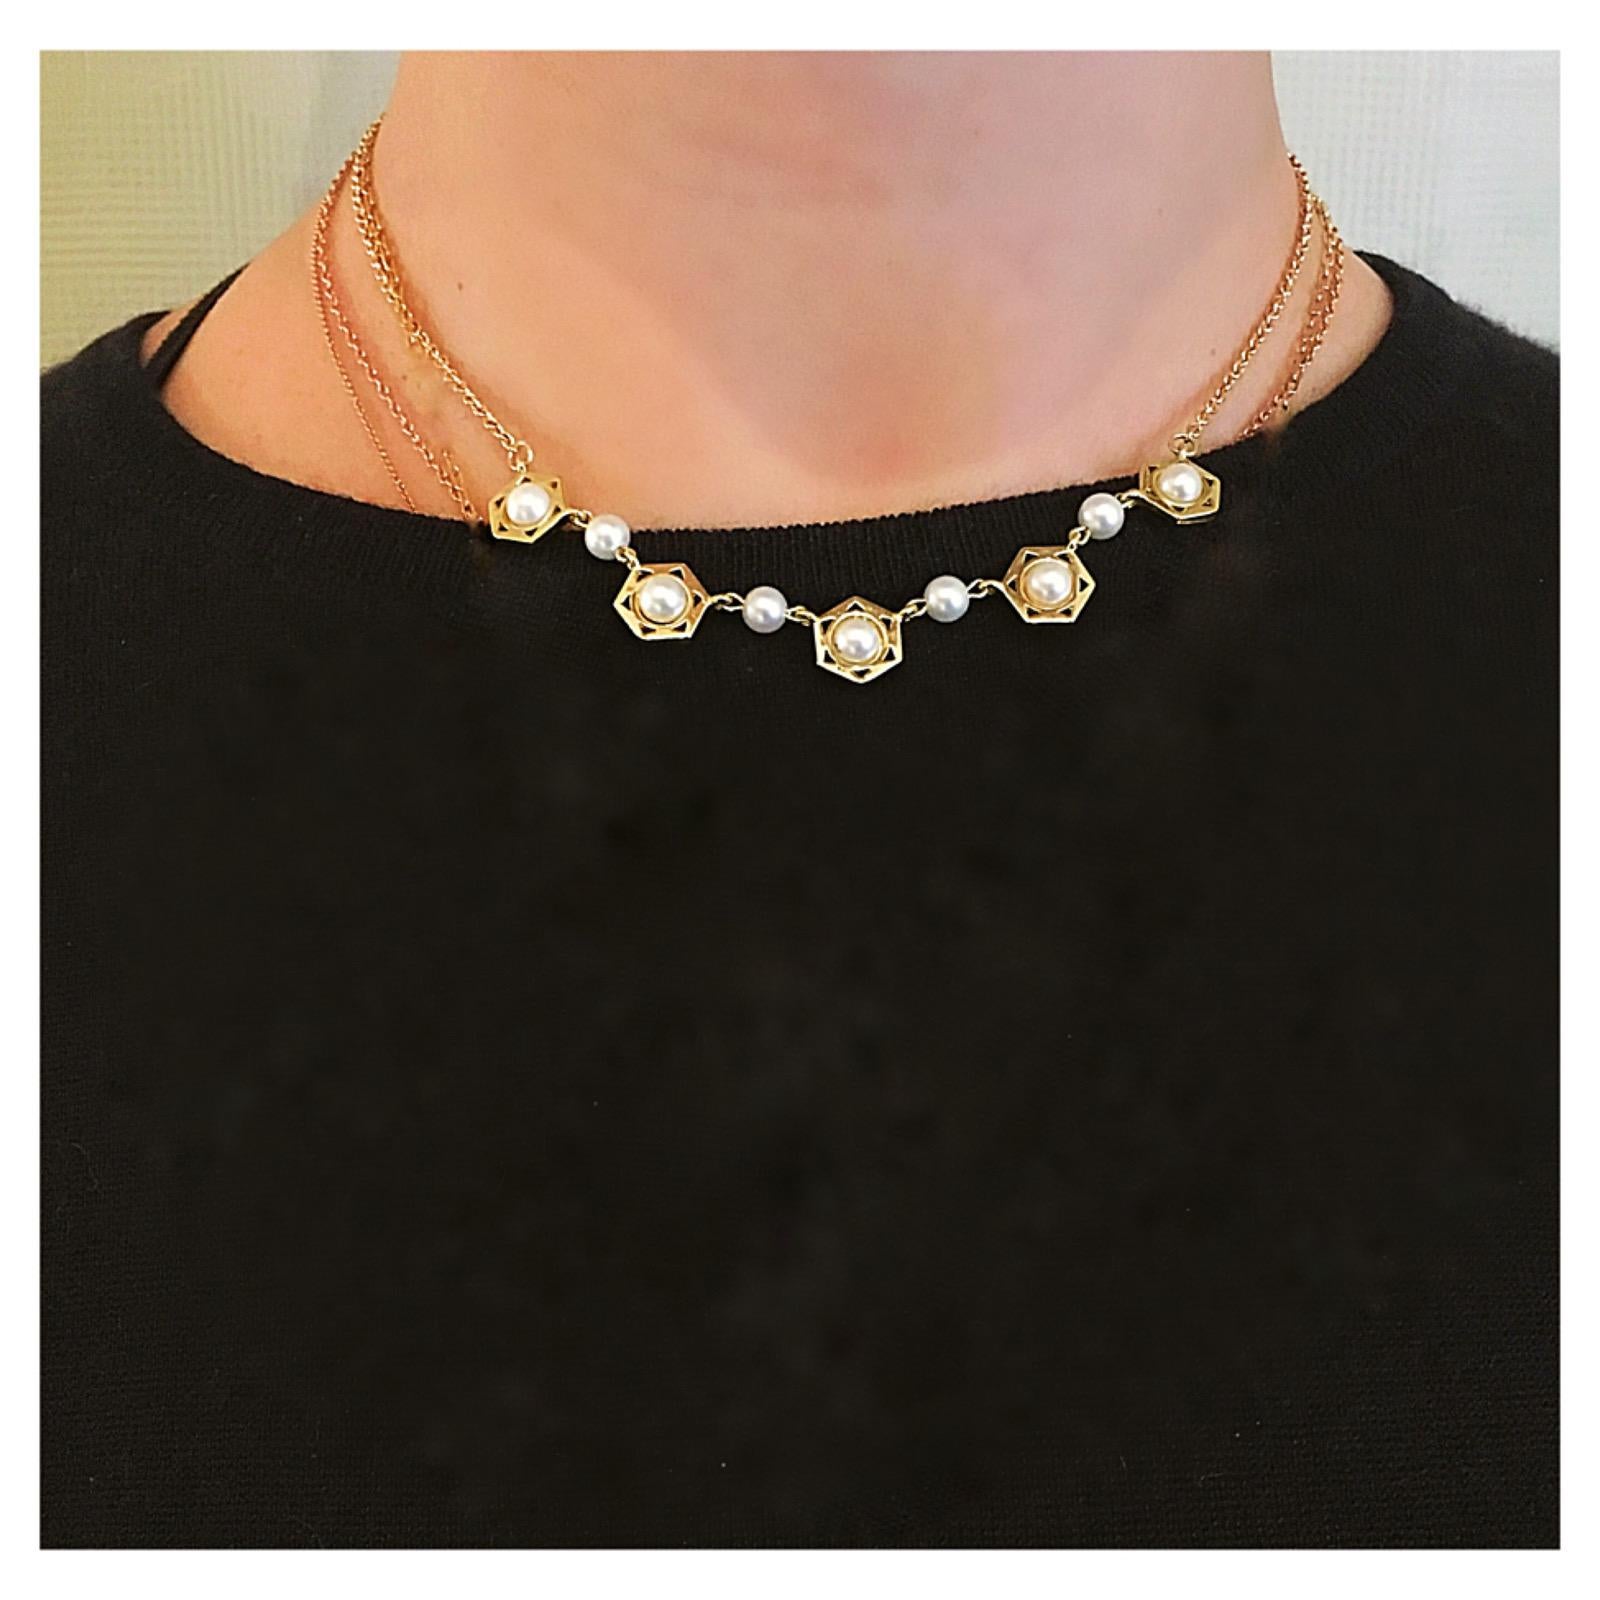 A classic with a twist, this pearl and 18 karat gold necklace is a new way to incorporate pearls into your wardrobe.  There is a modern, geometric feel to this design with hexagon motifs surrounding white pearls.  The 18k chain is finished with our